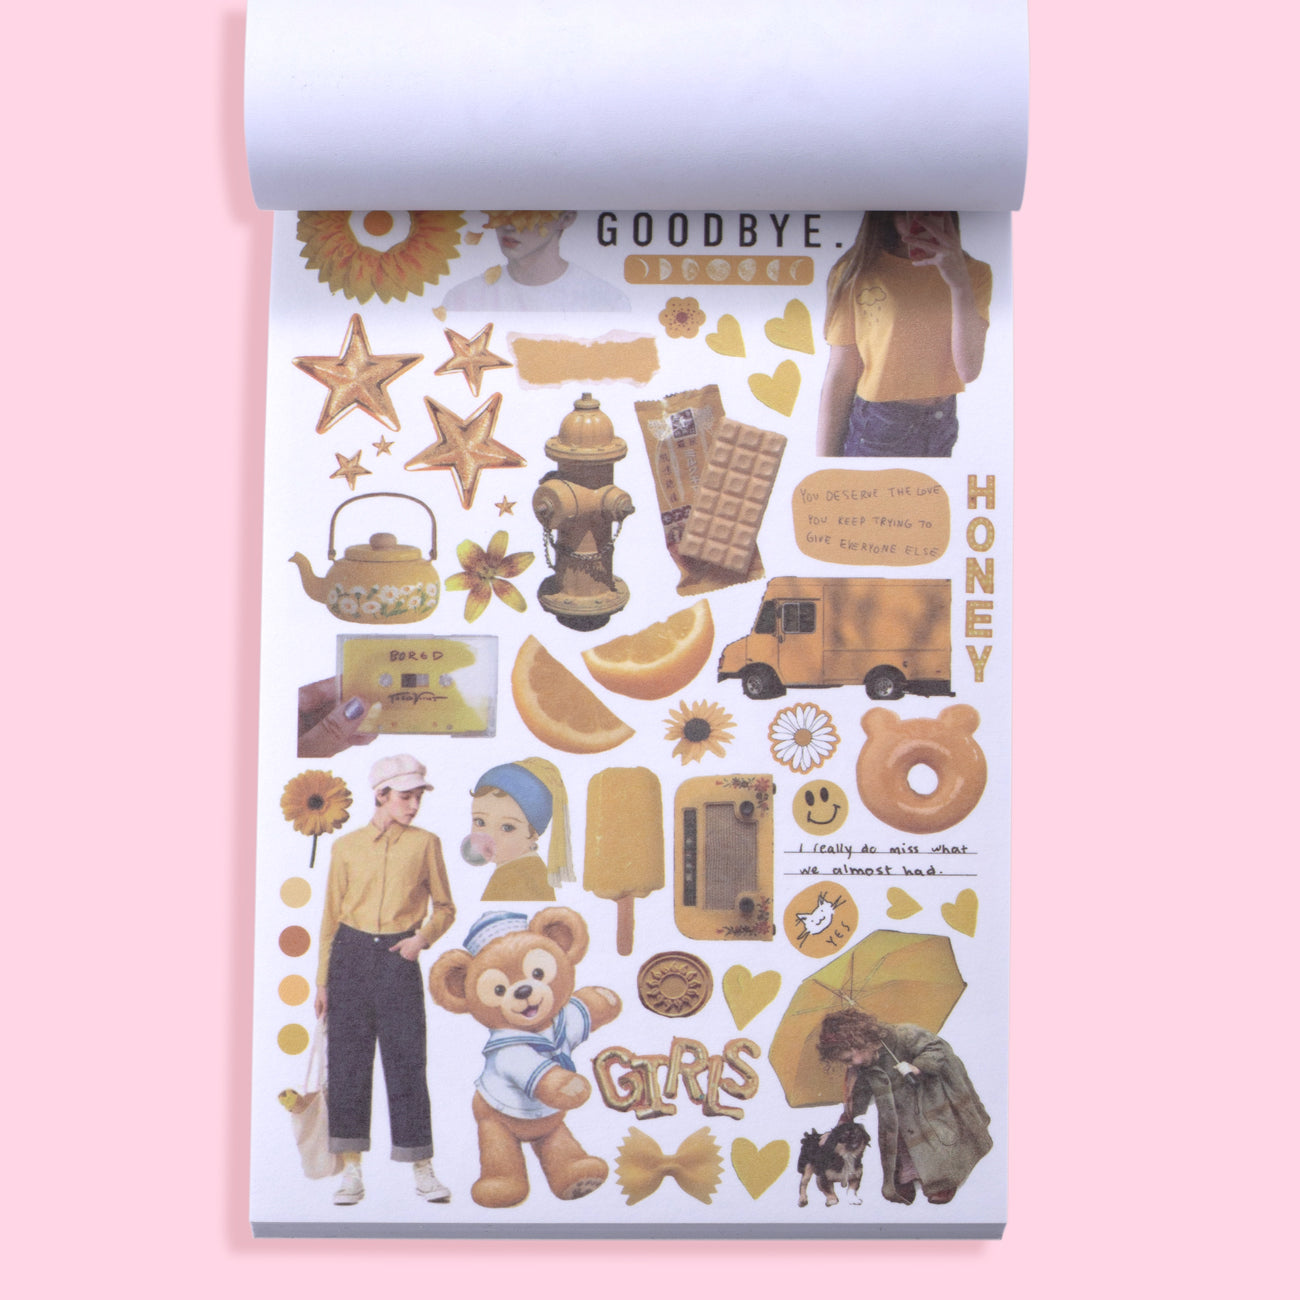 Gentle Color Scrapbooking Paper Pad - Peach — Stationery Pal